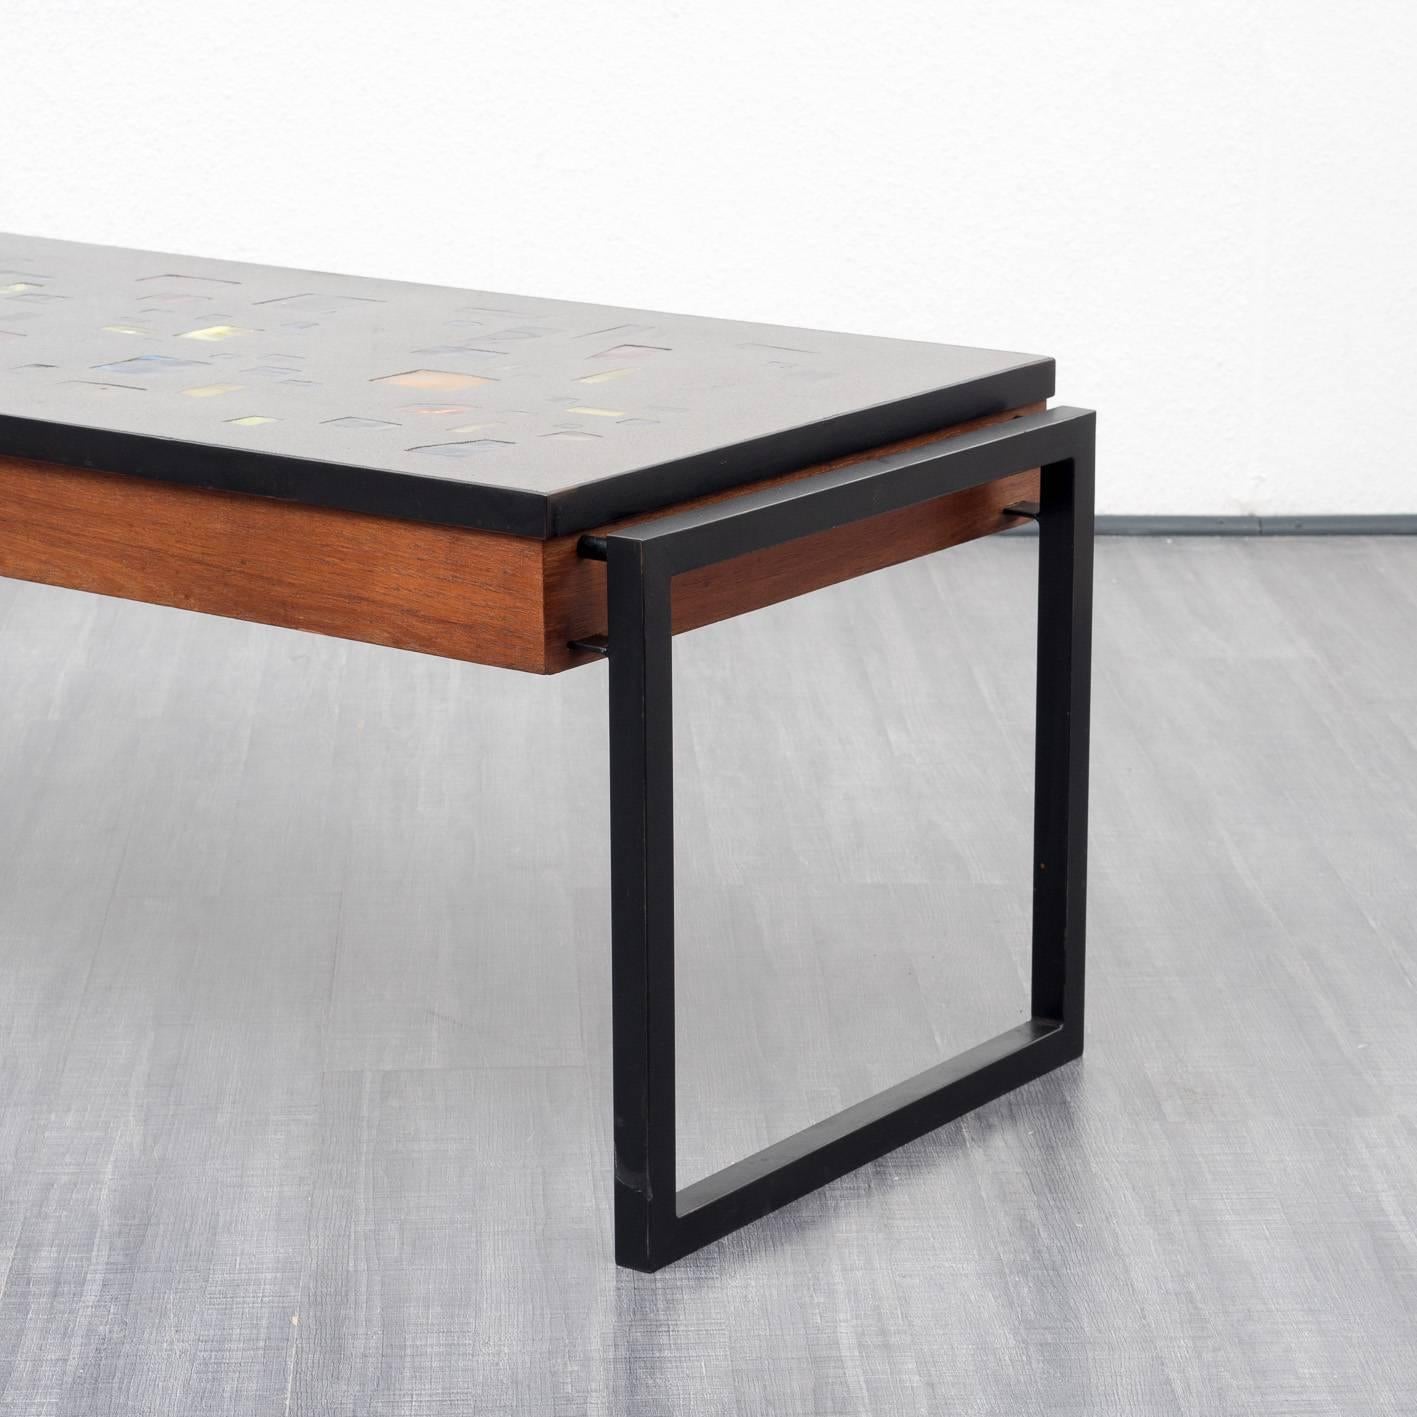 Extraordinary coffee table from the 1960s. Teak frame with black, vat-shaped square steel tube feet. The tabletop is composed of colored plastic stones, cast in artificial resin, which can be illuminated from the bottom. The light can be switched on